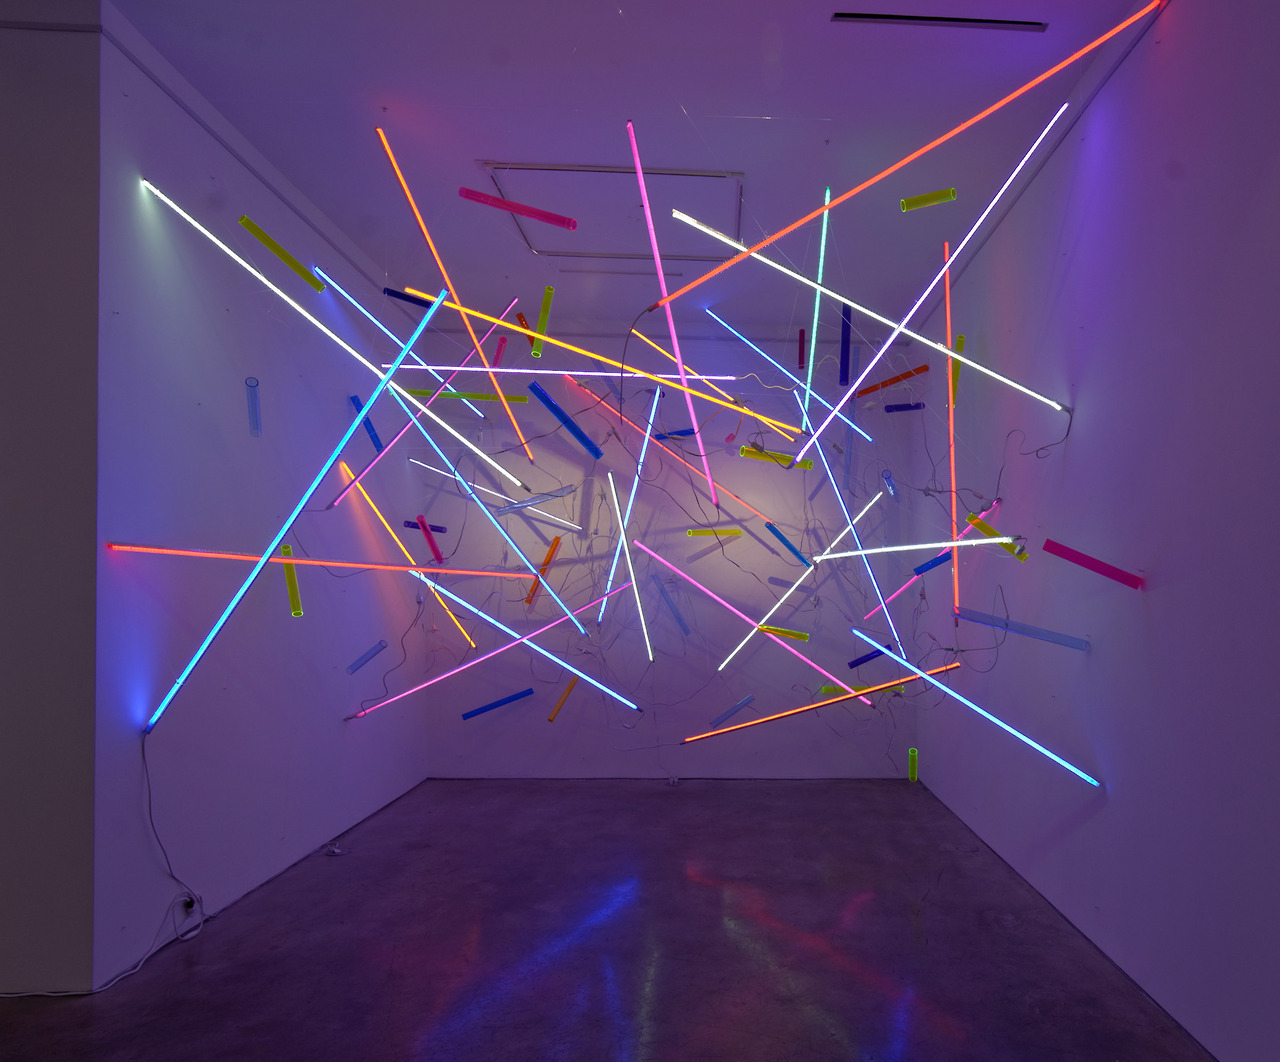 itscolossal: Explosive Light-Based Installations by Adela Andea